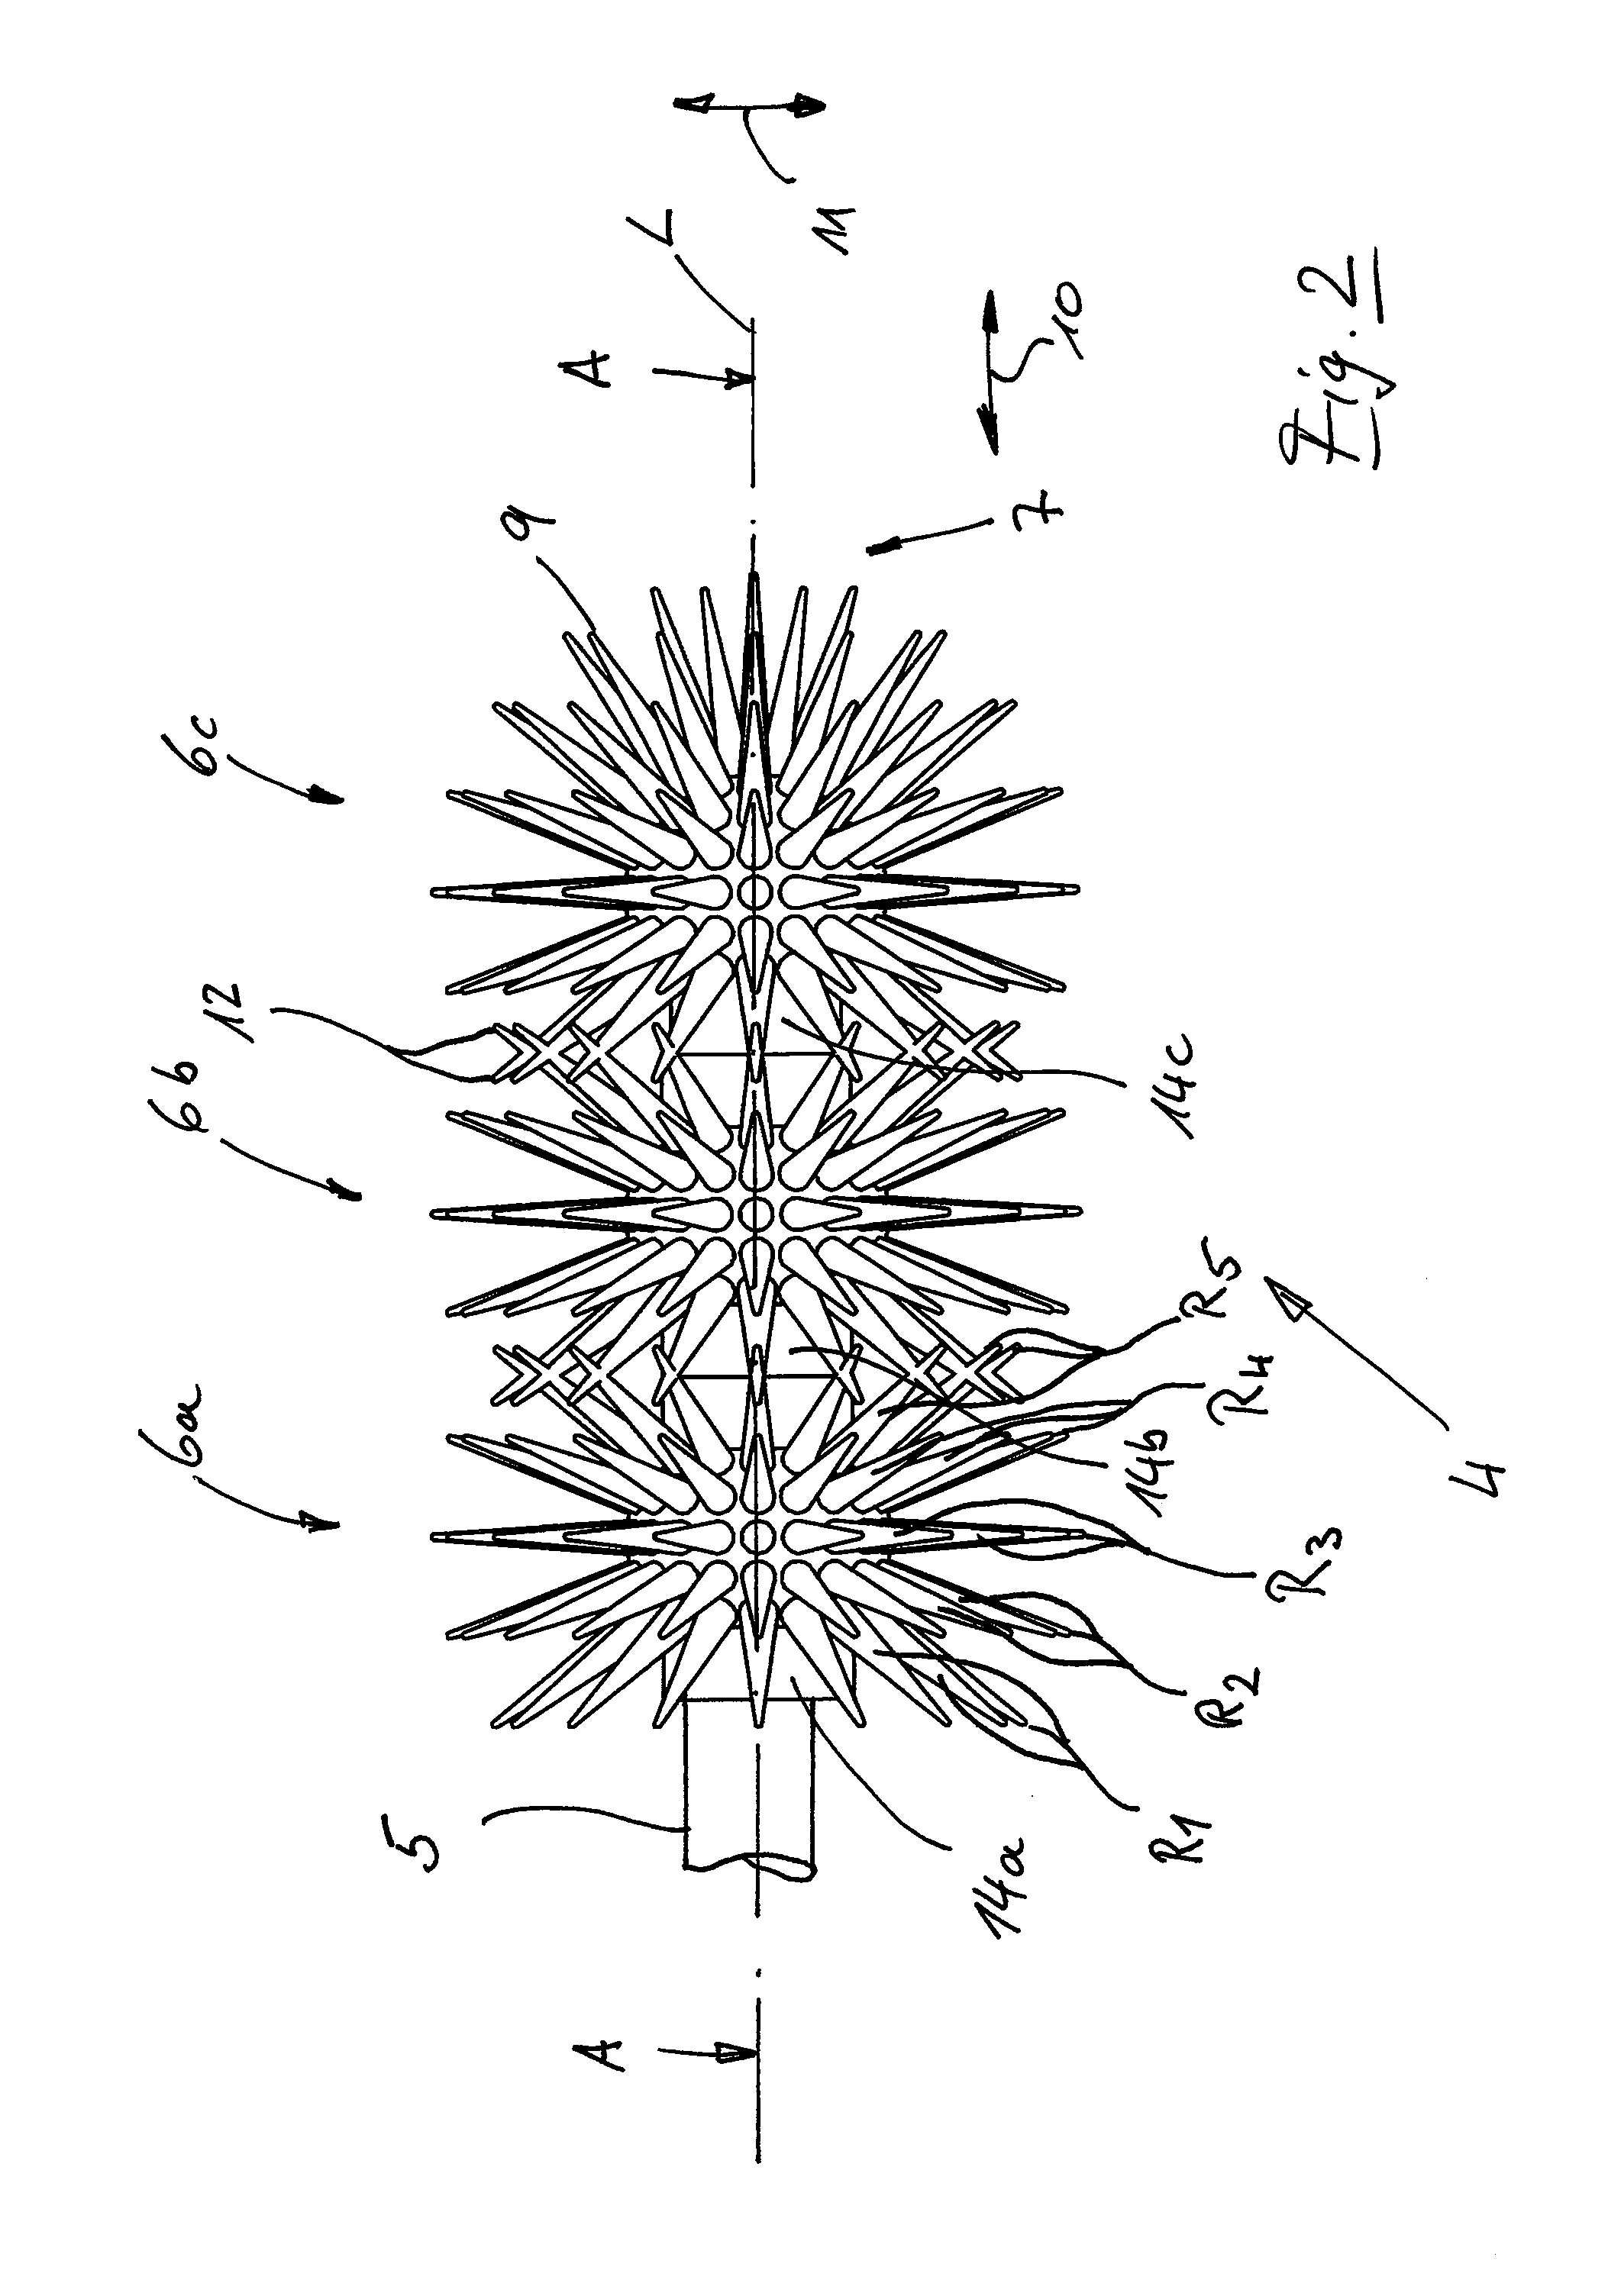 Applicator device for applying a cosmetic, applicator element therefor, and cosmetic unit comprising the applicator device